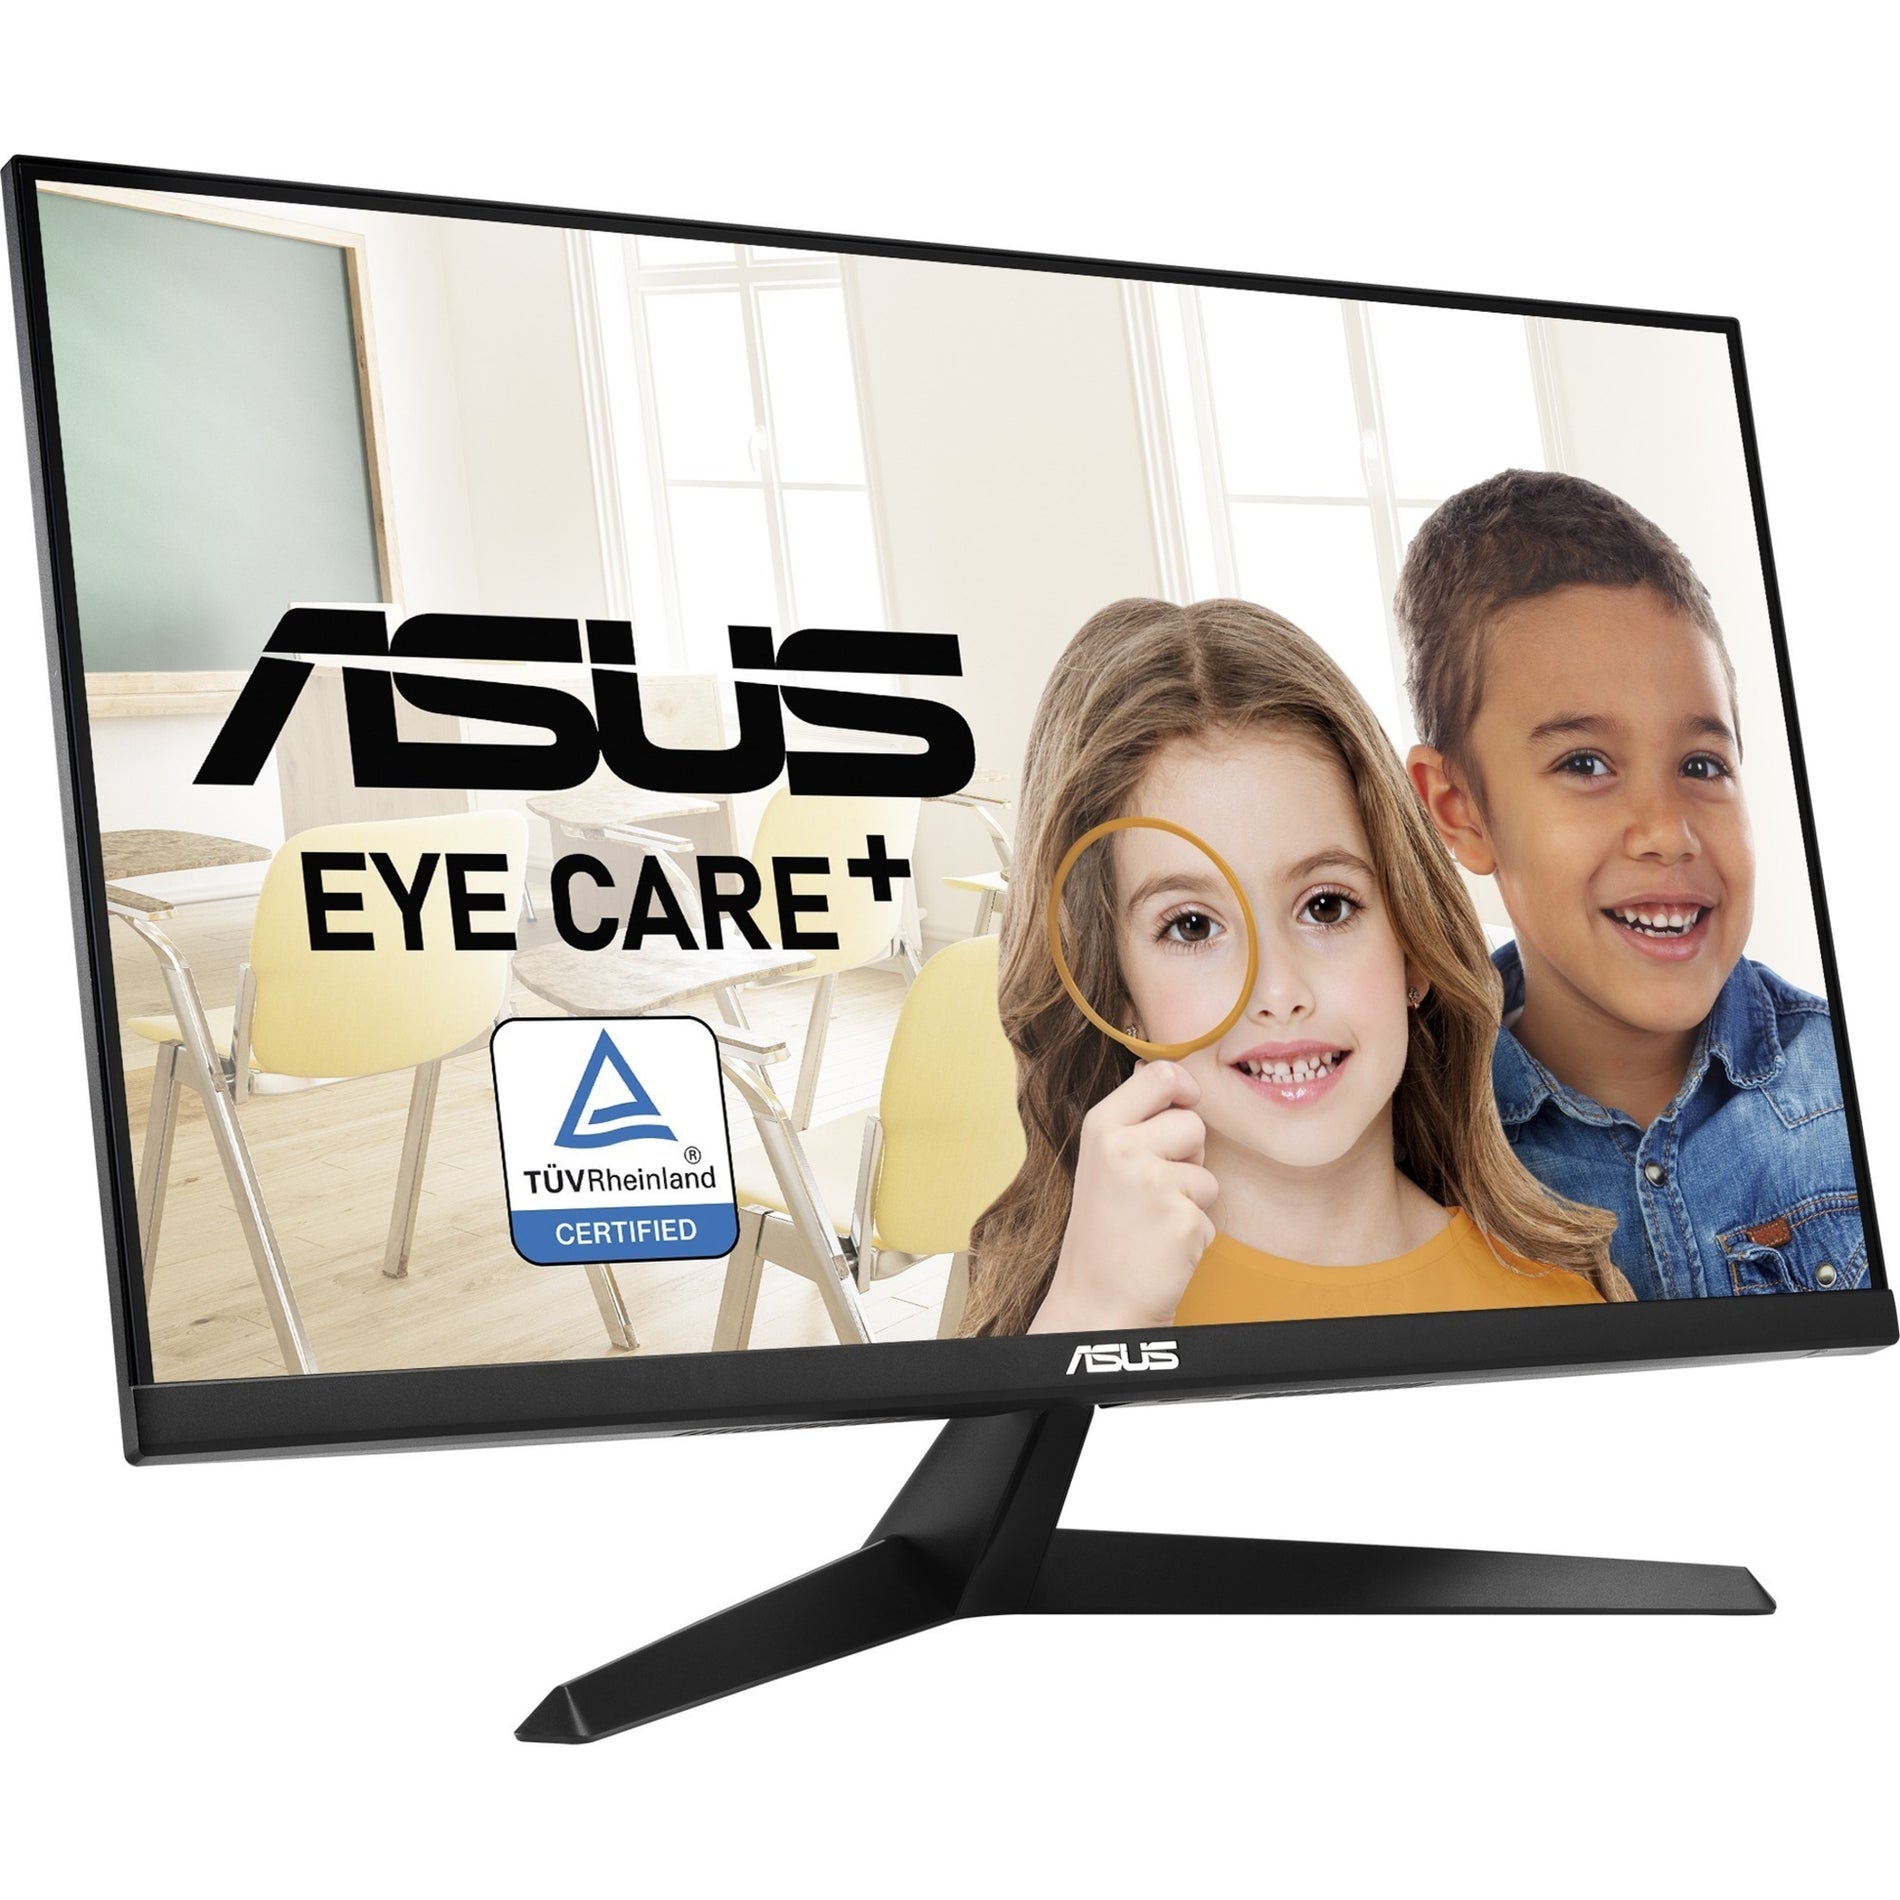 Asus VY279HE Gaming LCD Monitor, 27" Full HD, Adaptive Sync/FreeSync, Anti-glare, Low Blue Light